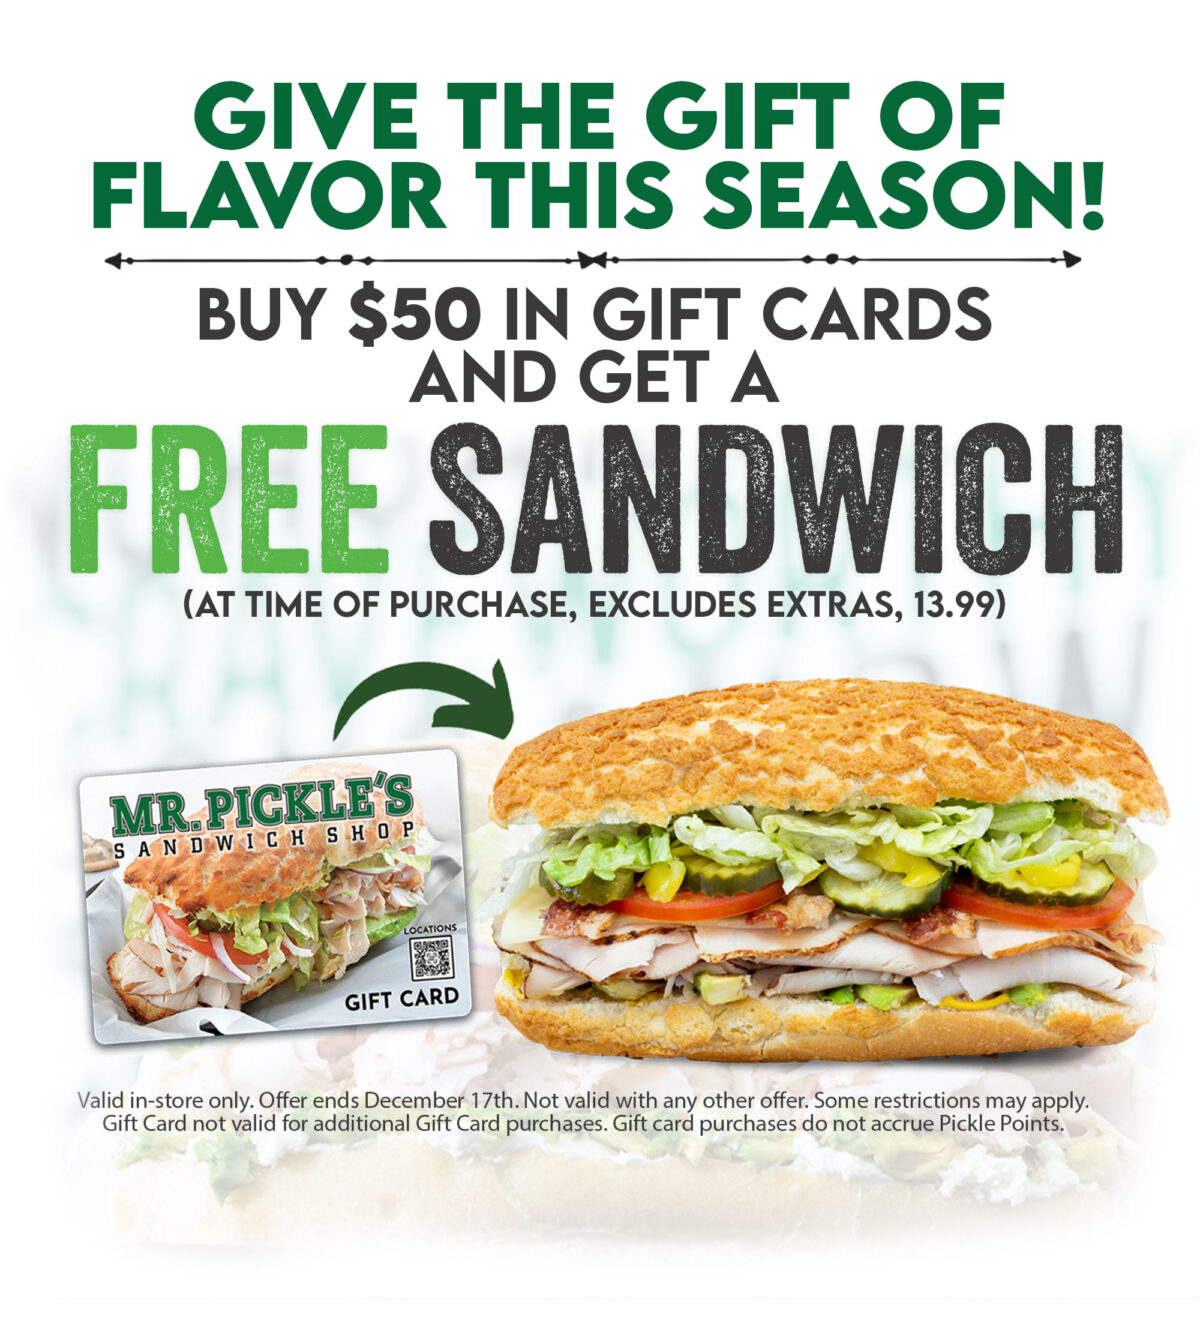 Give the gift of flavor this season! Buy $50 in Gift Cards and get a FREE Sandwich (at time of purchase, excludes extras 13.00 max value) Valid in store only Expires 12/17/23 Not valid with an other offer. Some restrictions apply Gift card not valid for additional gift card purchases. 